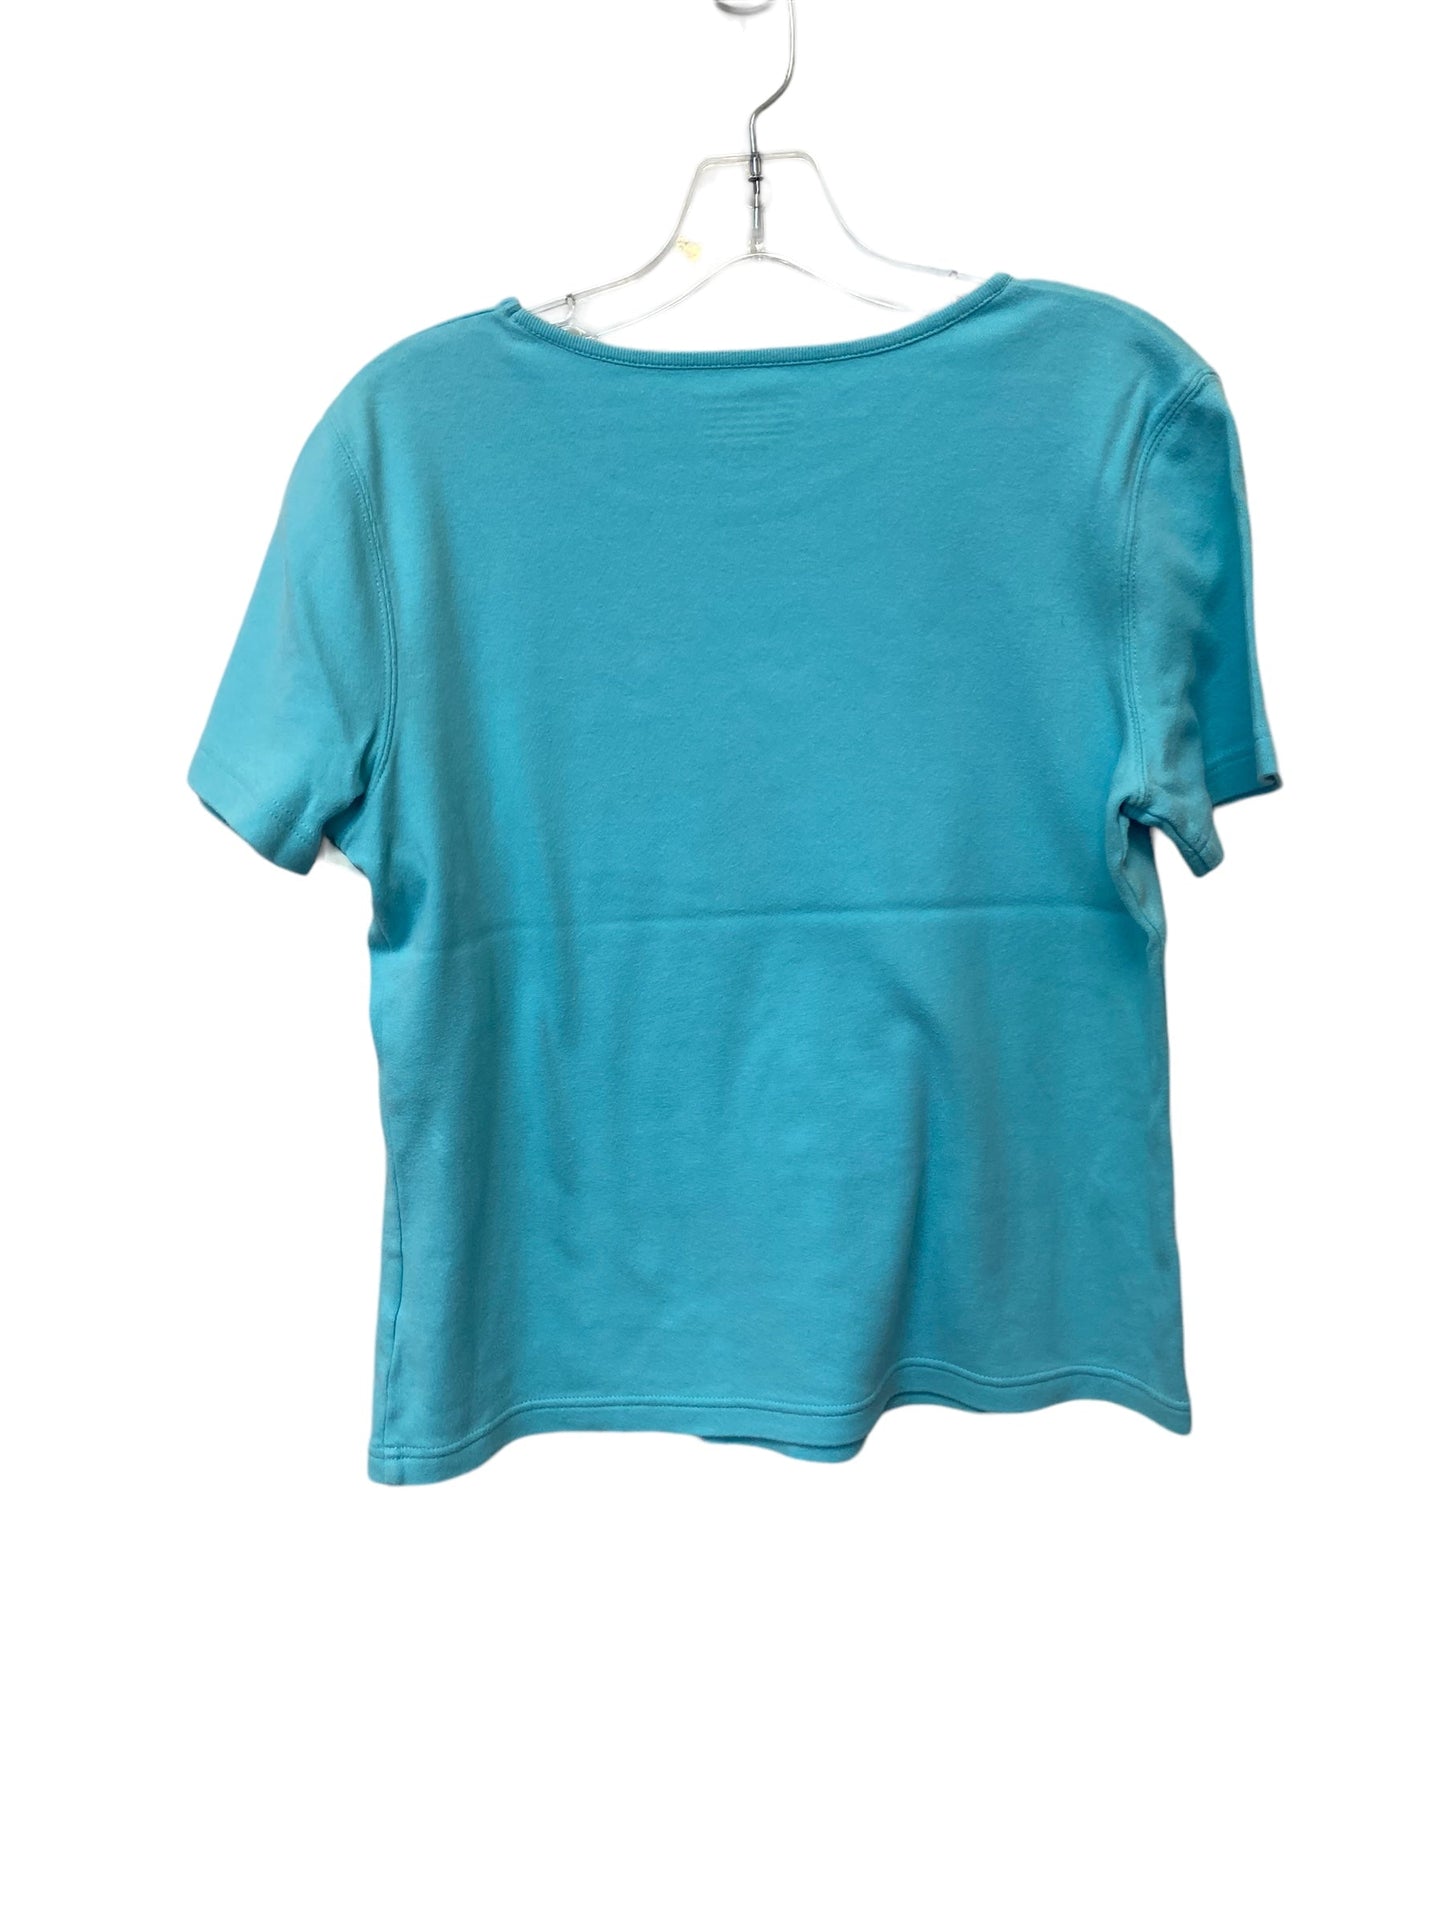 Blue Top Short Sleeve Basic Clothes Mentor, Size M